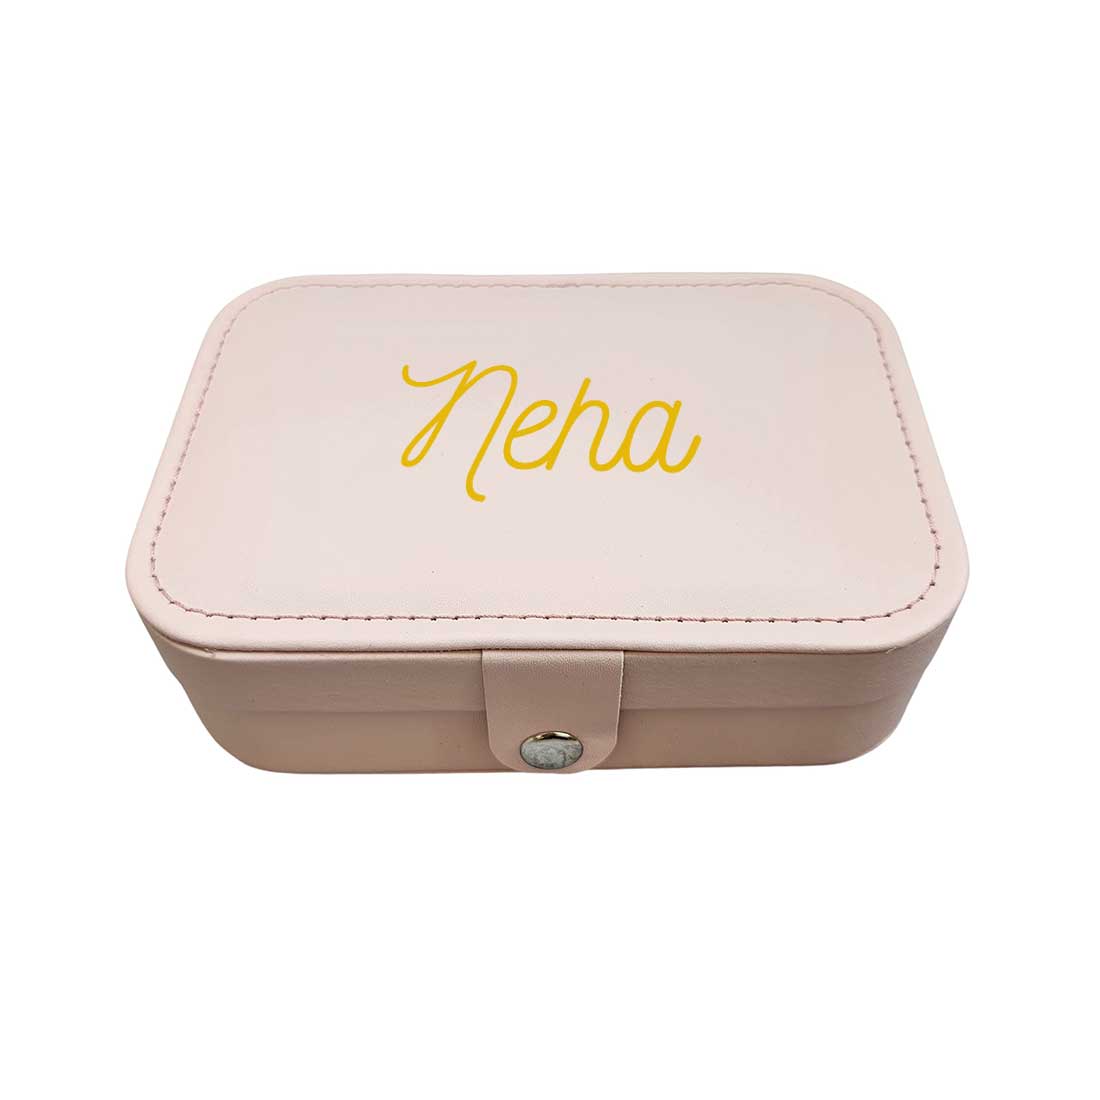 Personalized Jewellery Box Organizer For Travel jewelry Case for Earrings Pendant - Add Name